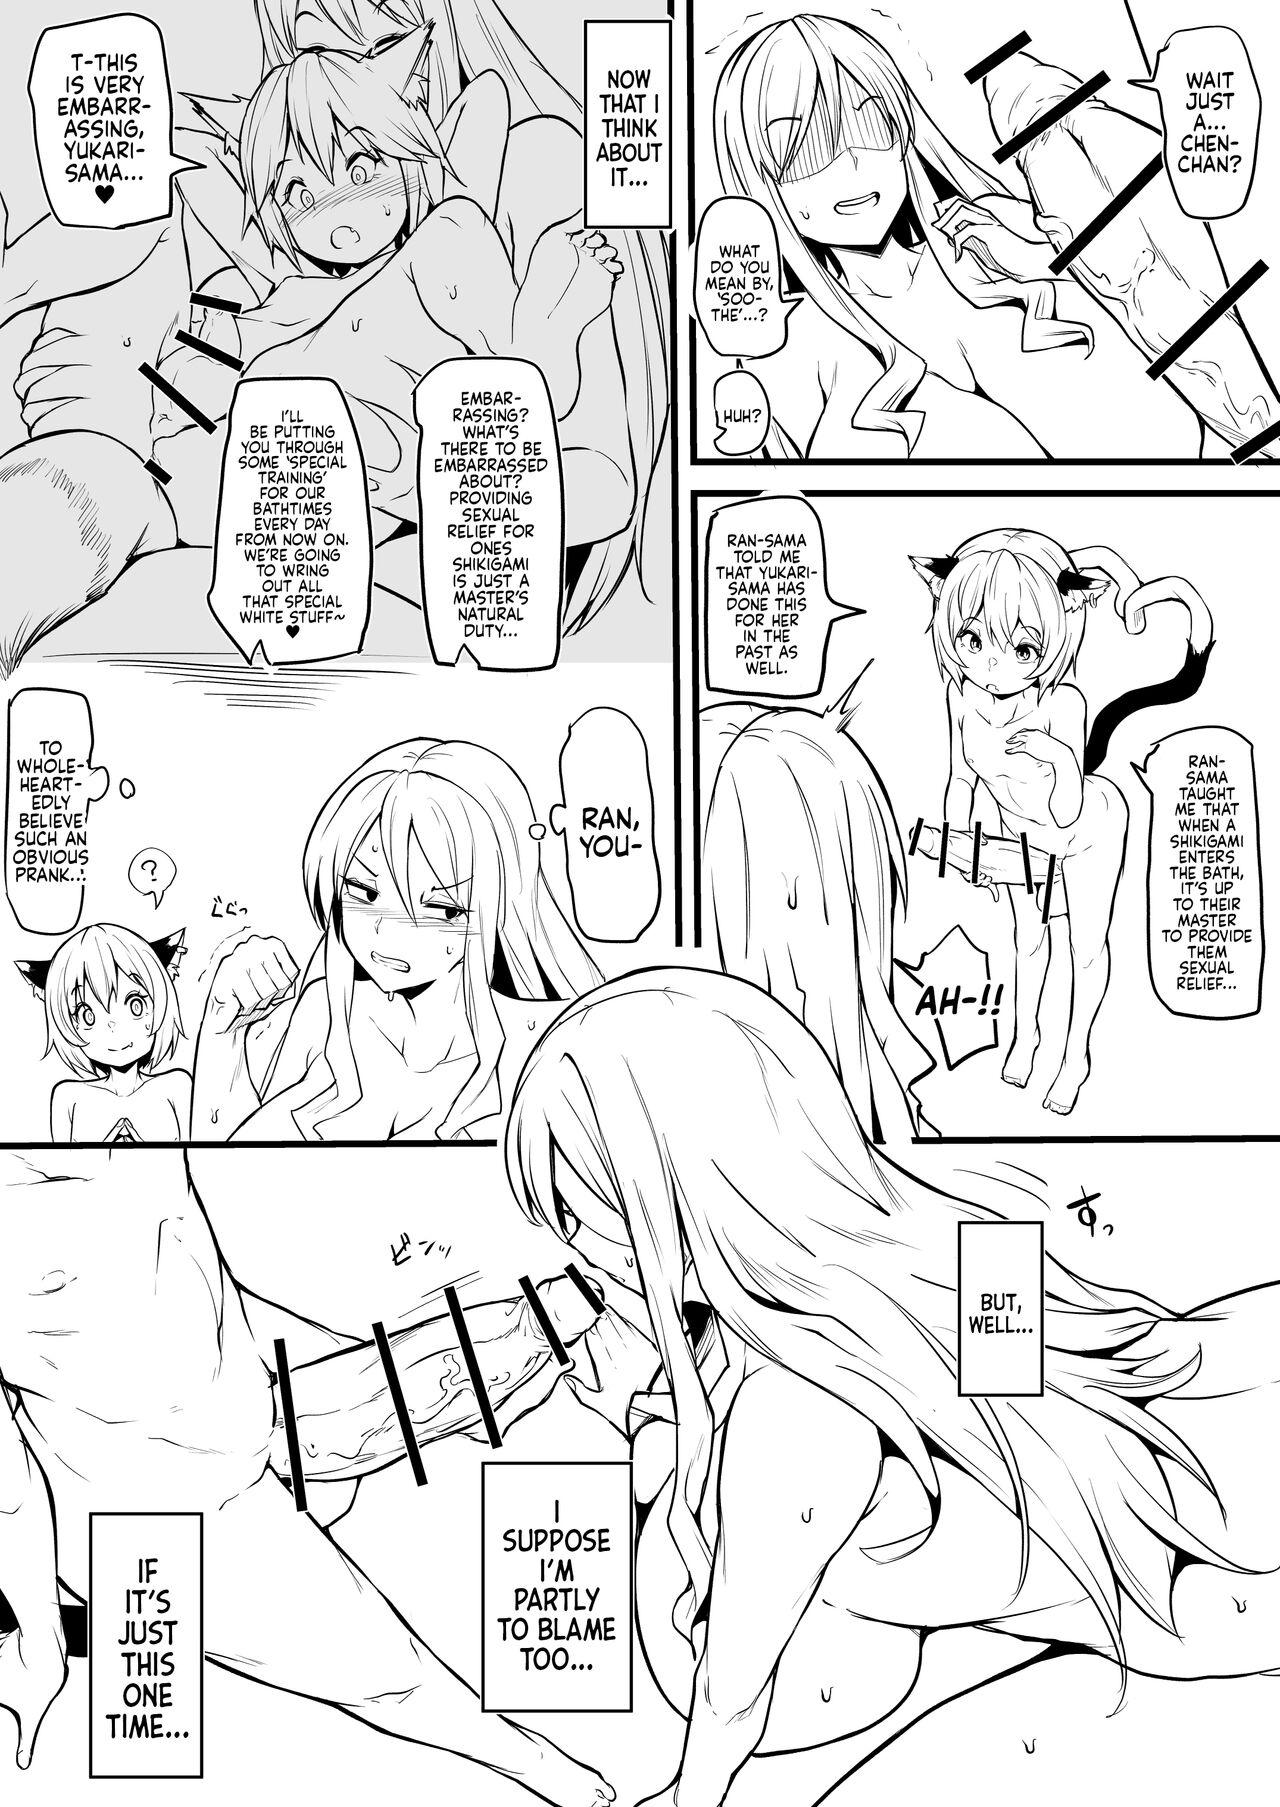 Big Dick Oh Chen Chen - Touhou project Oiled - Page 3